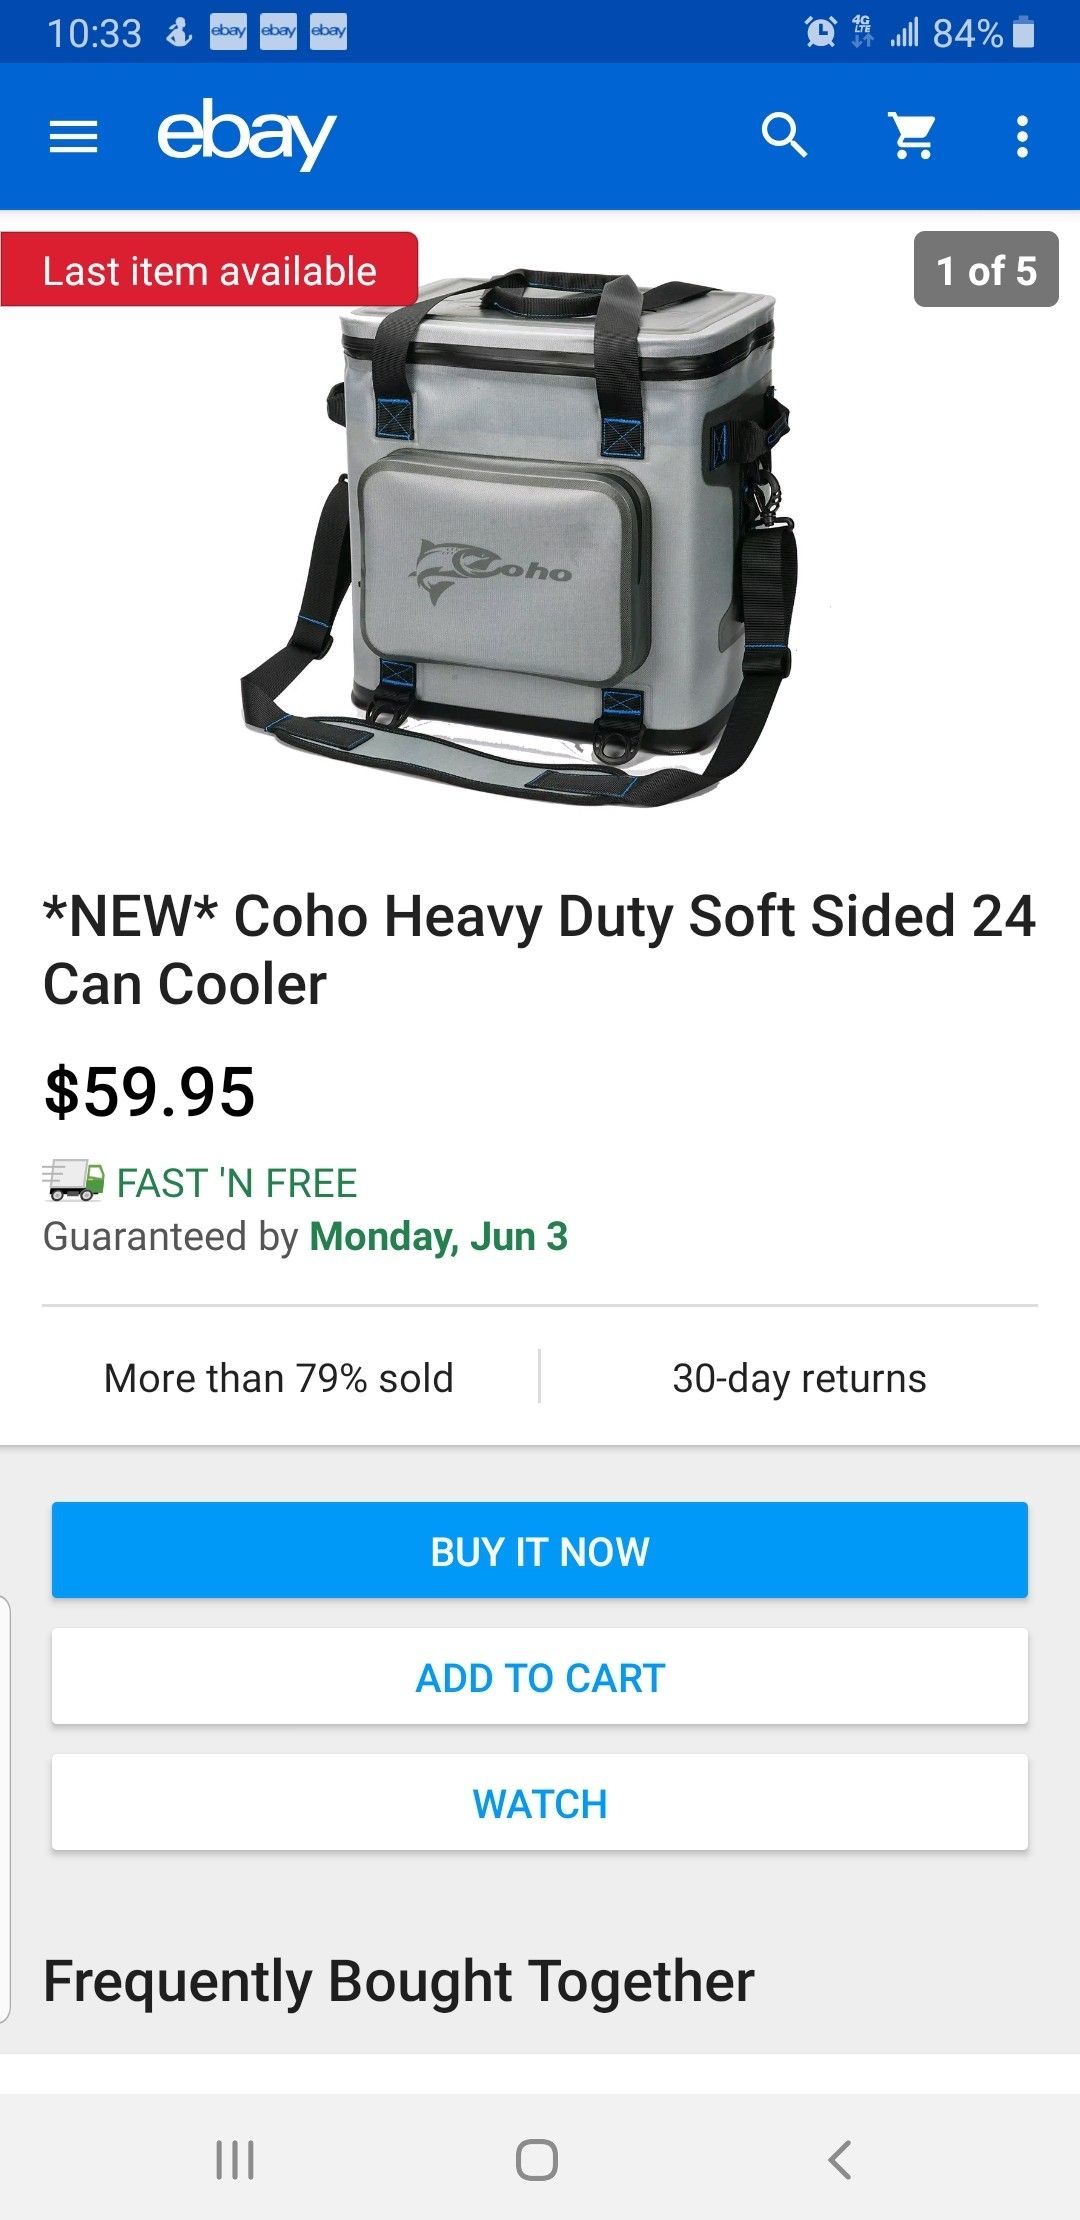 Coho Heavy Duty Soft Sided 24 Can Cooler